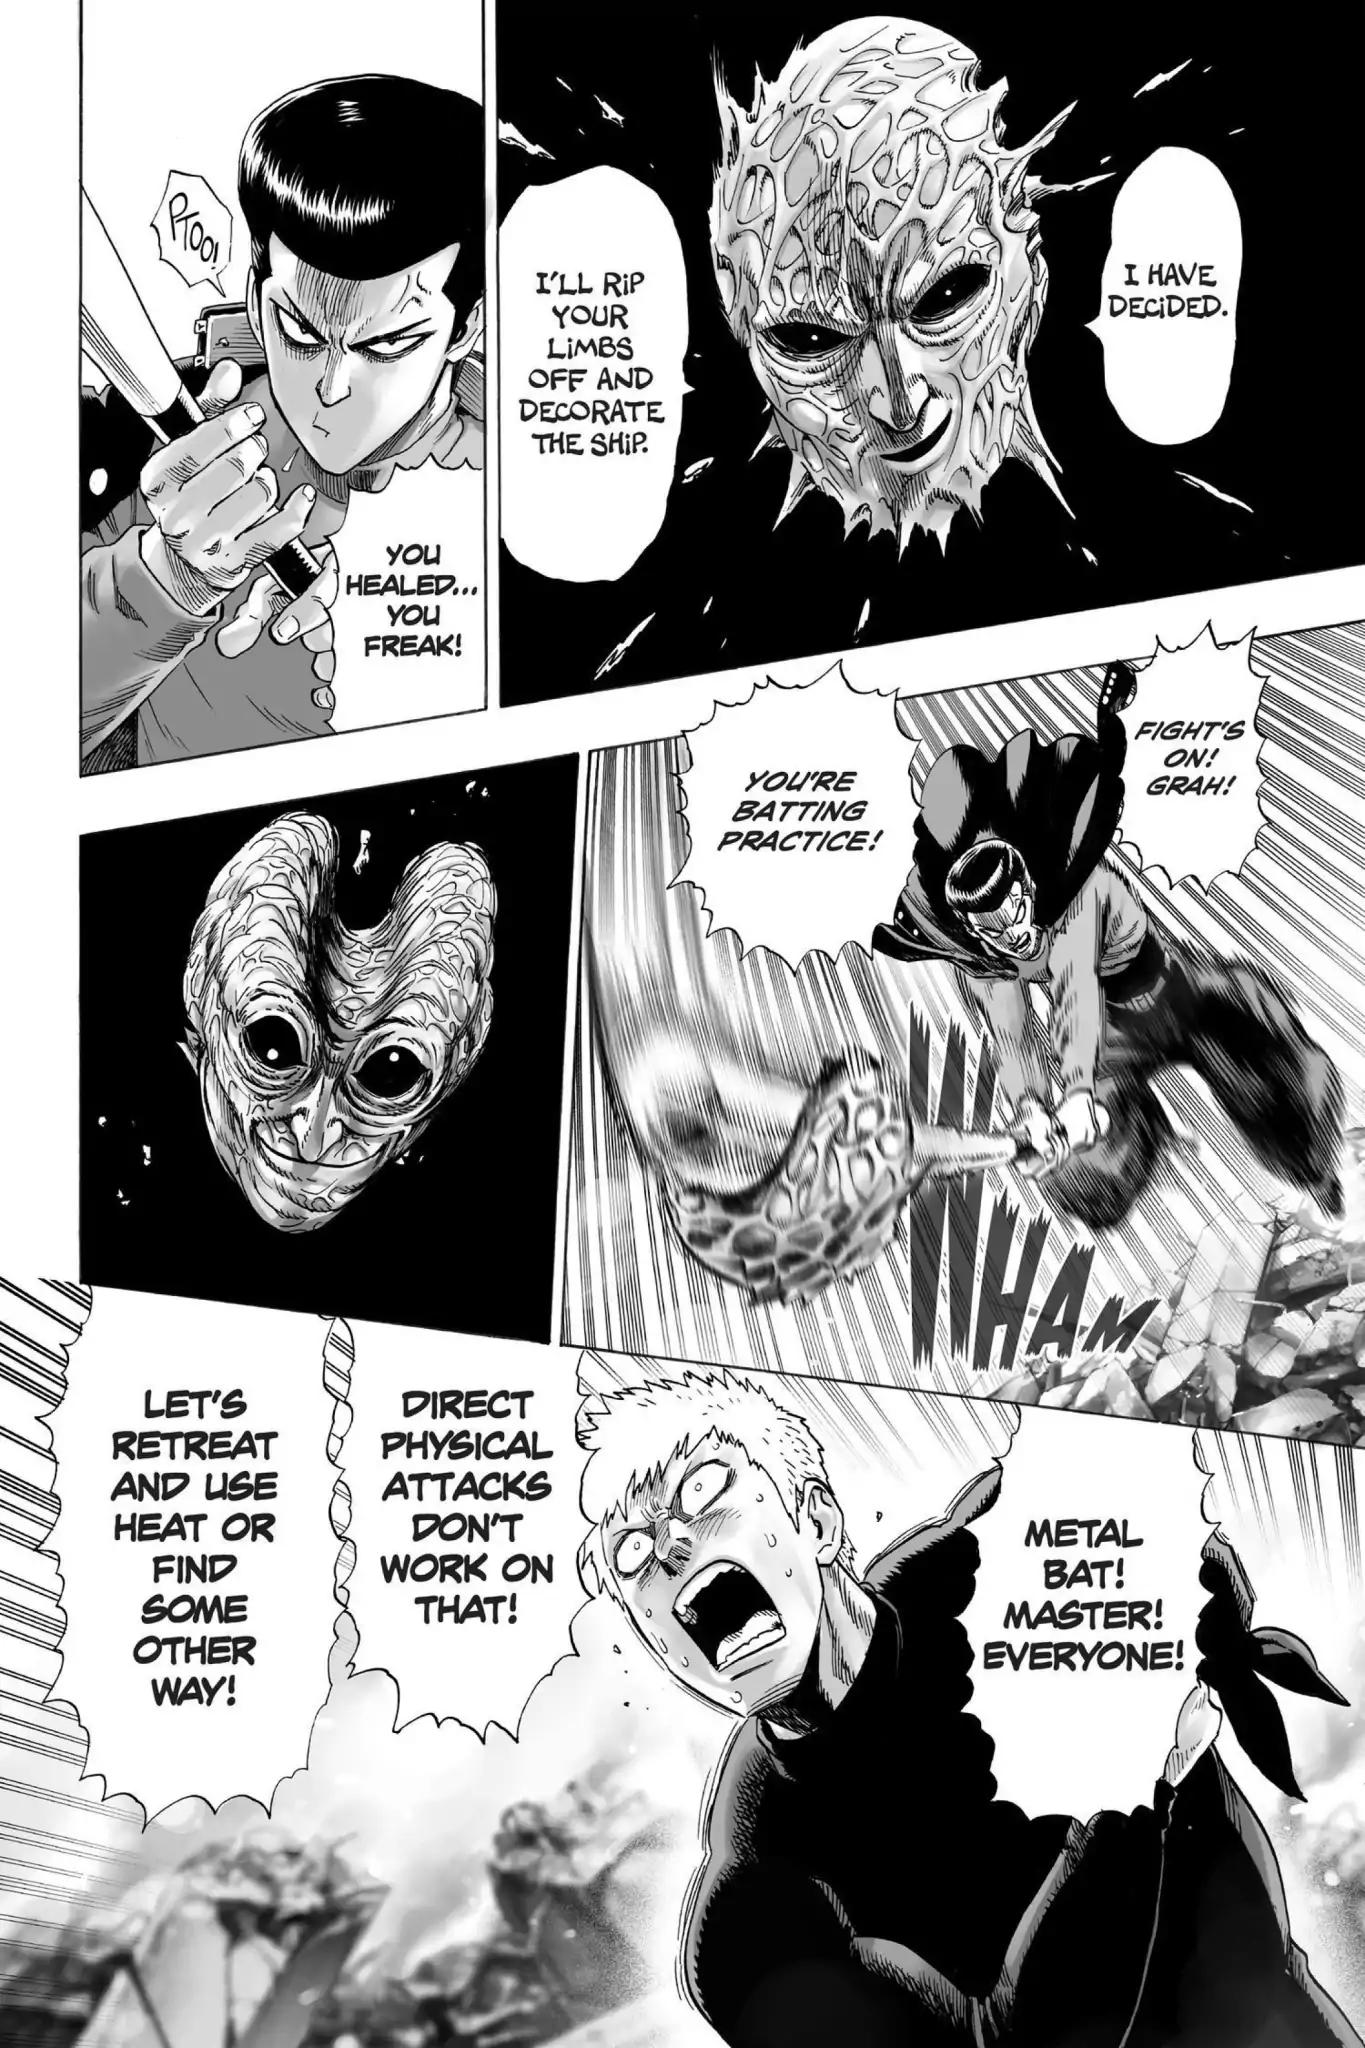 One-Punch Man chapter 33 page 4